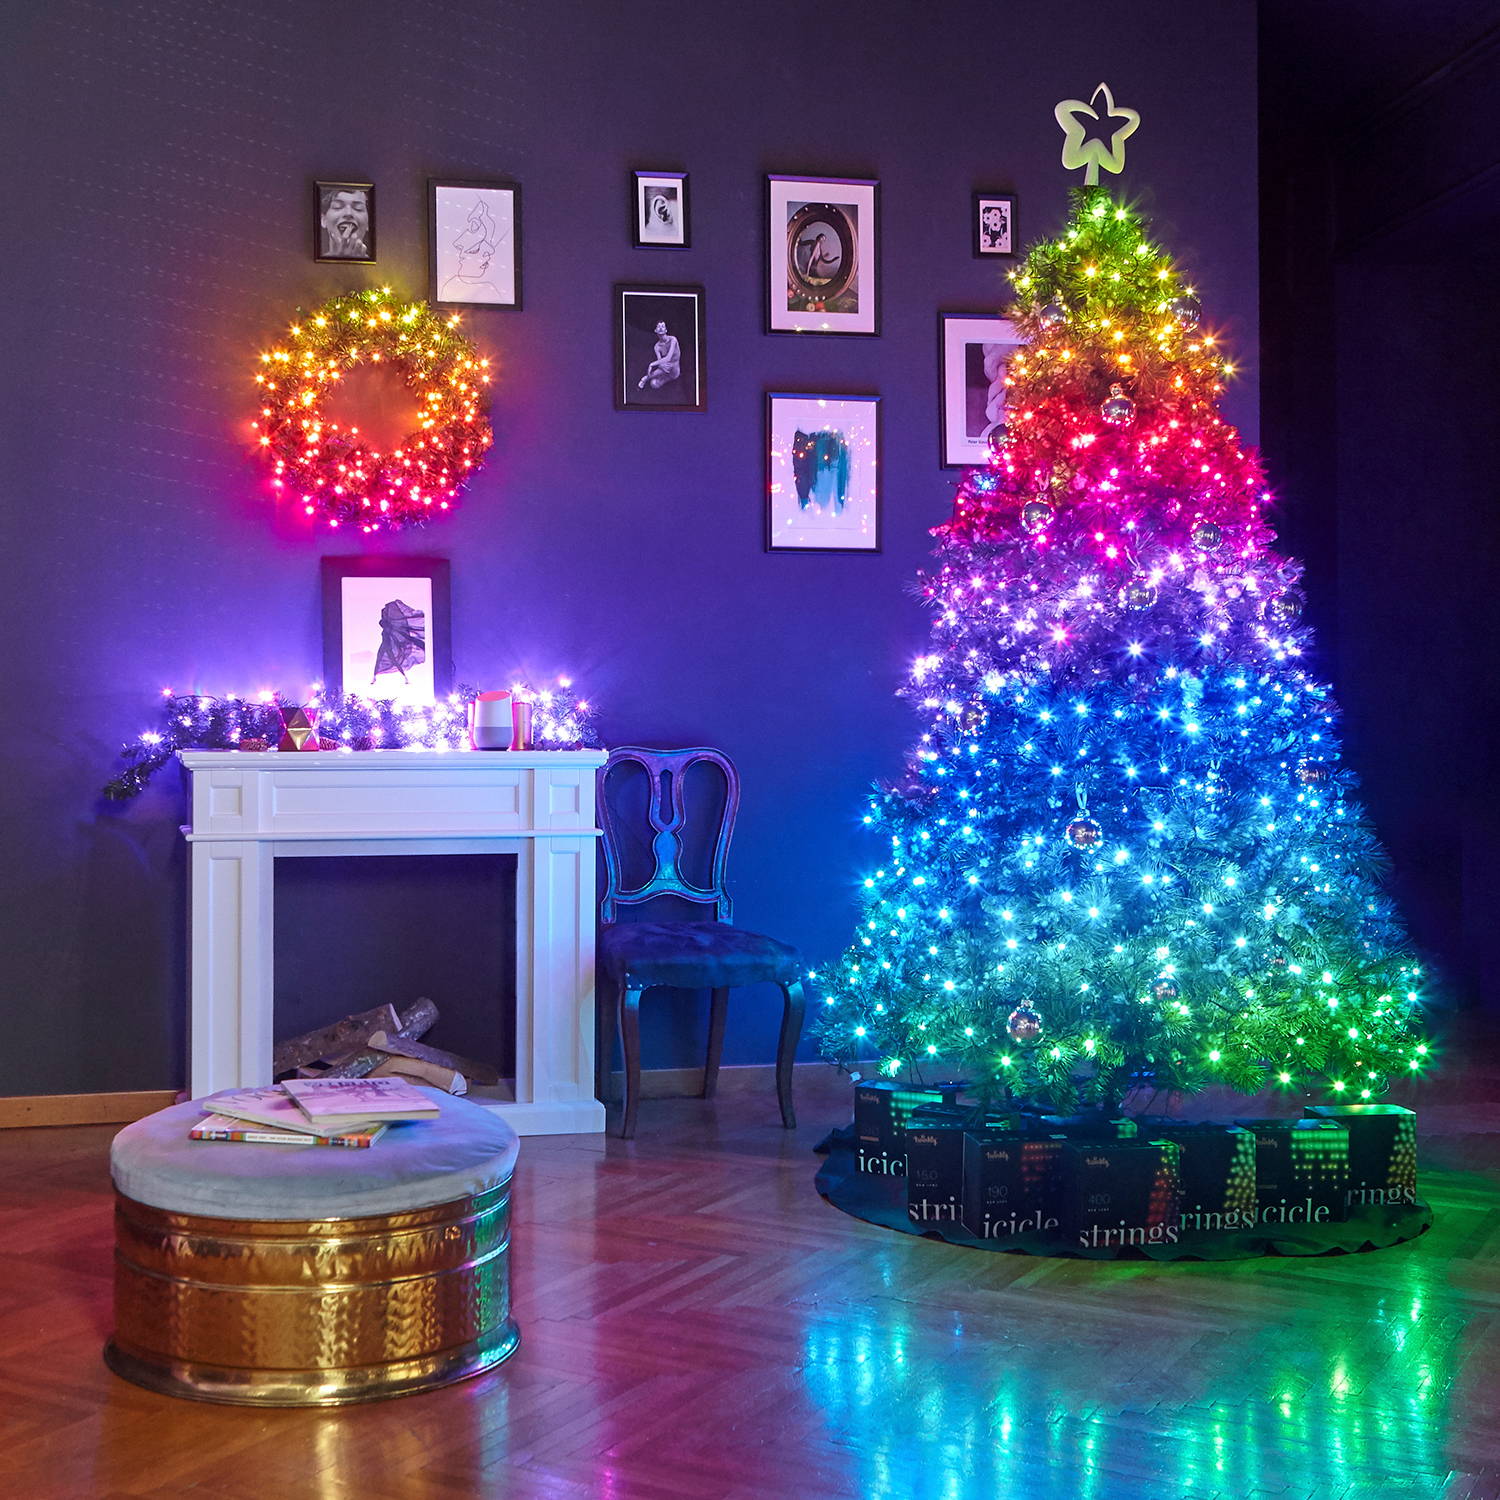 Multi coloured Twinkly lights adorning Christmas tree, wreath and garland in living room